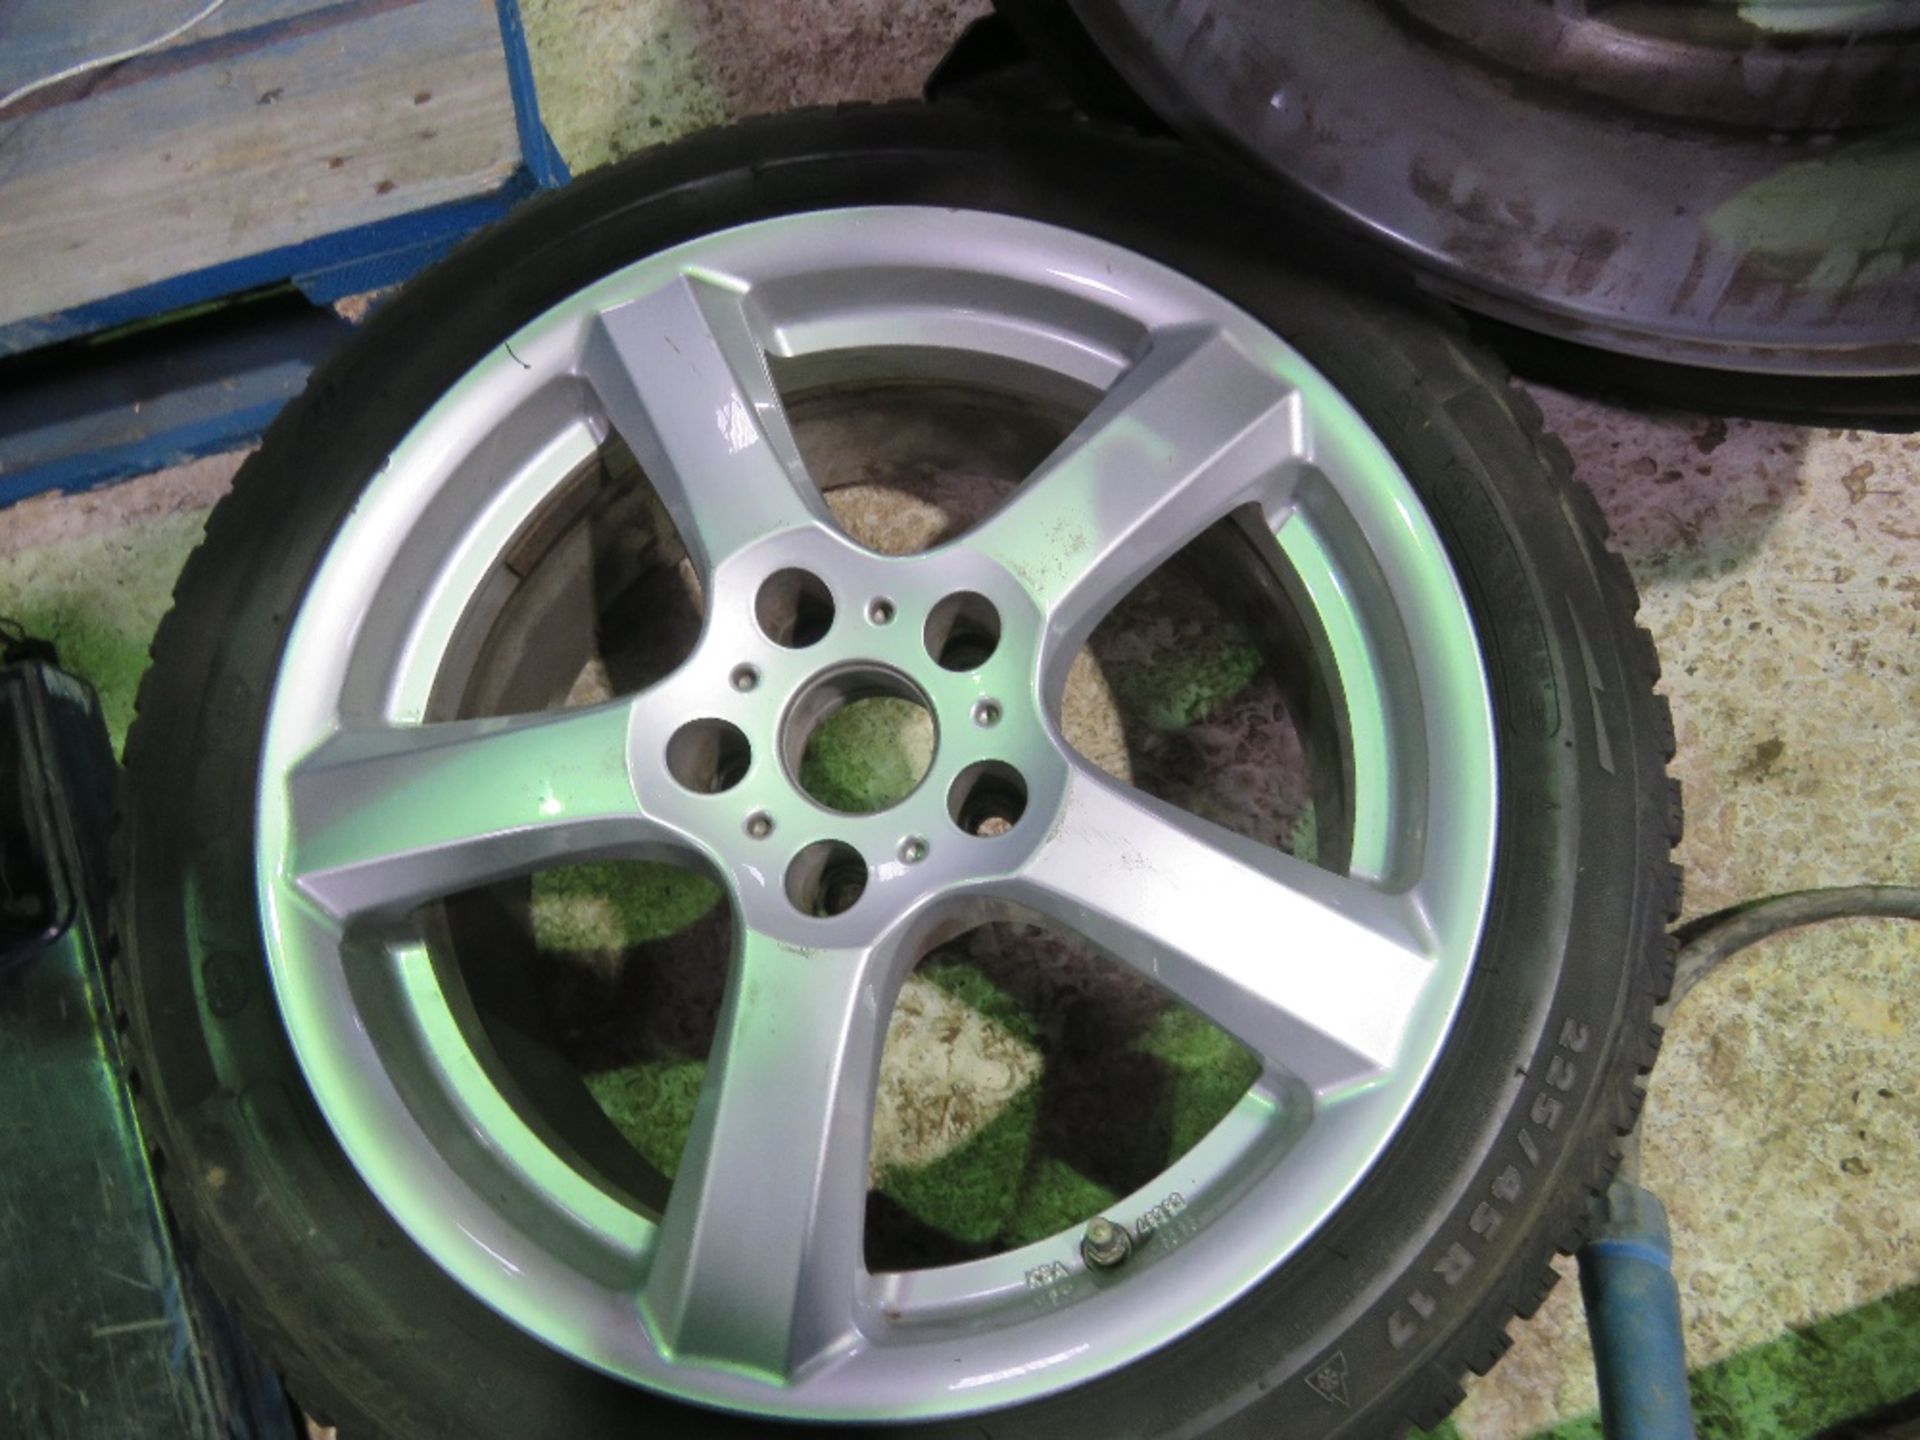 SET OF 4NO ENZO 225-45/17 ALLOY WHEELS AND TYRES, SNOW / WINTER TYRES FITTED. - Image 9 of 9